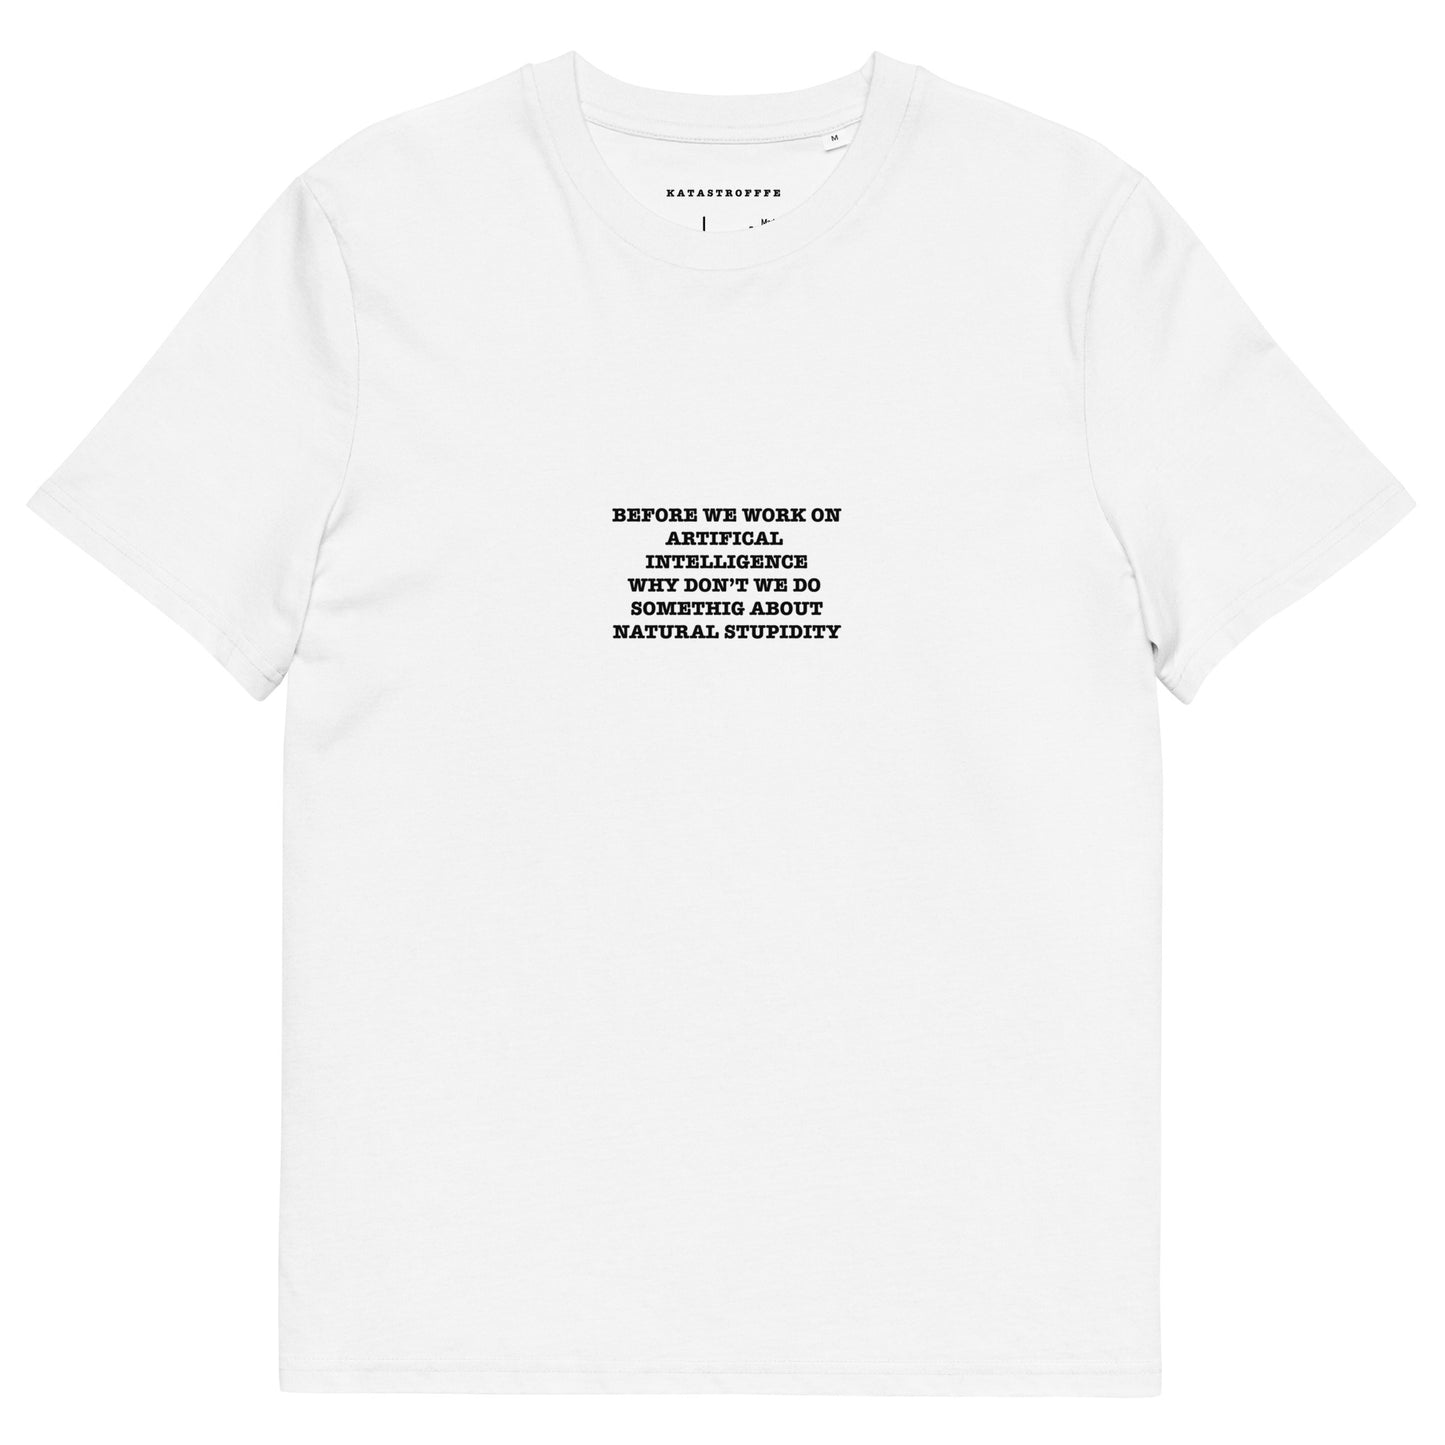 BEFORE WE WORK ON ARTIFICAL  INTELLIGENCE WHY DON’T WE DO  SOMETHIG ABOUT NATURAL STUPIDITY  Unisex organic cotton t-shirt